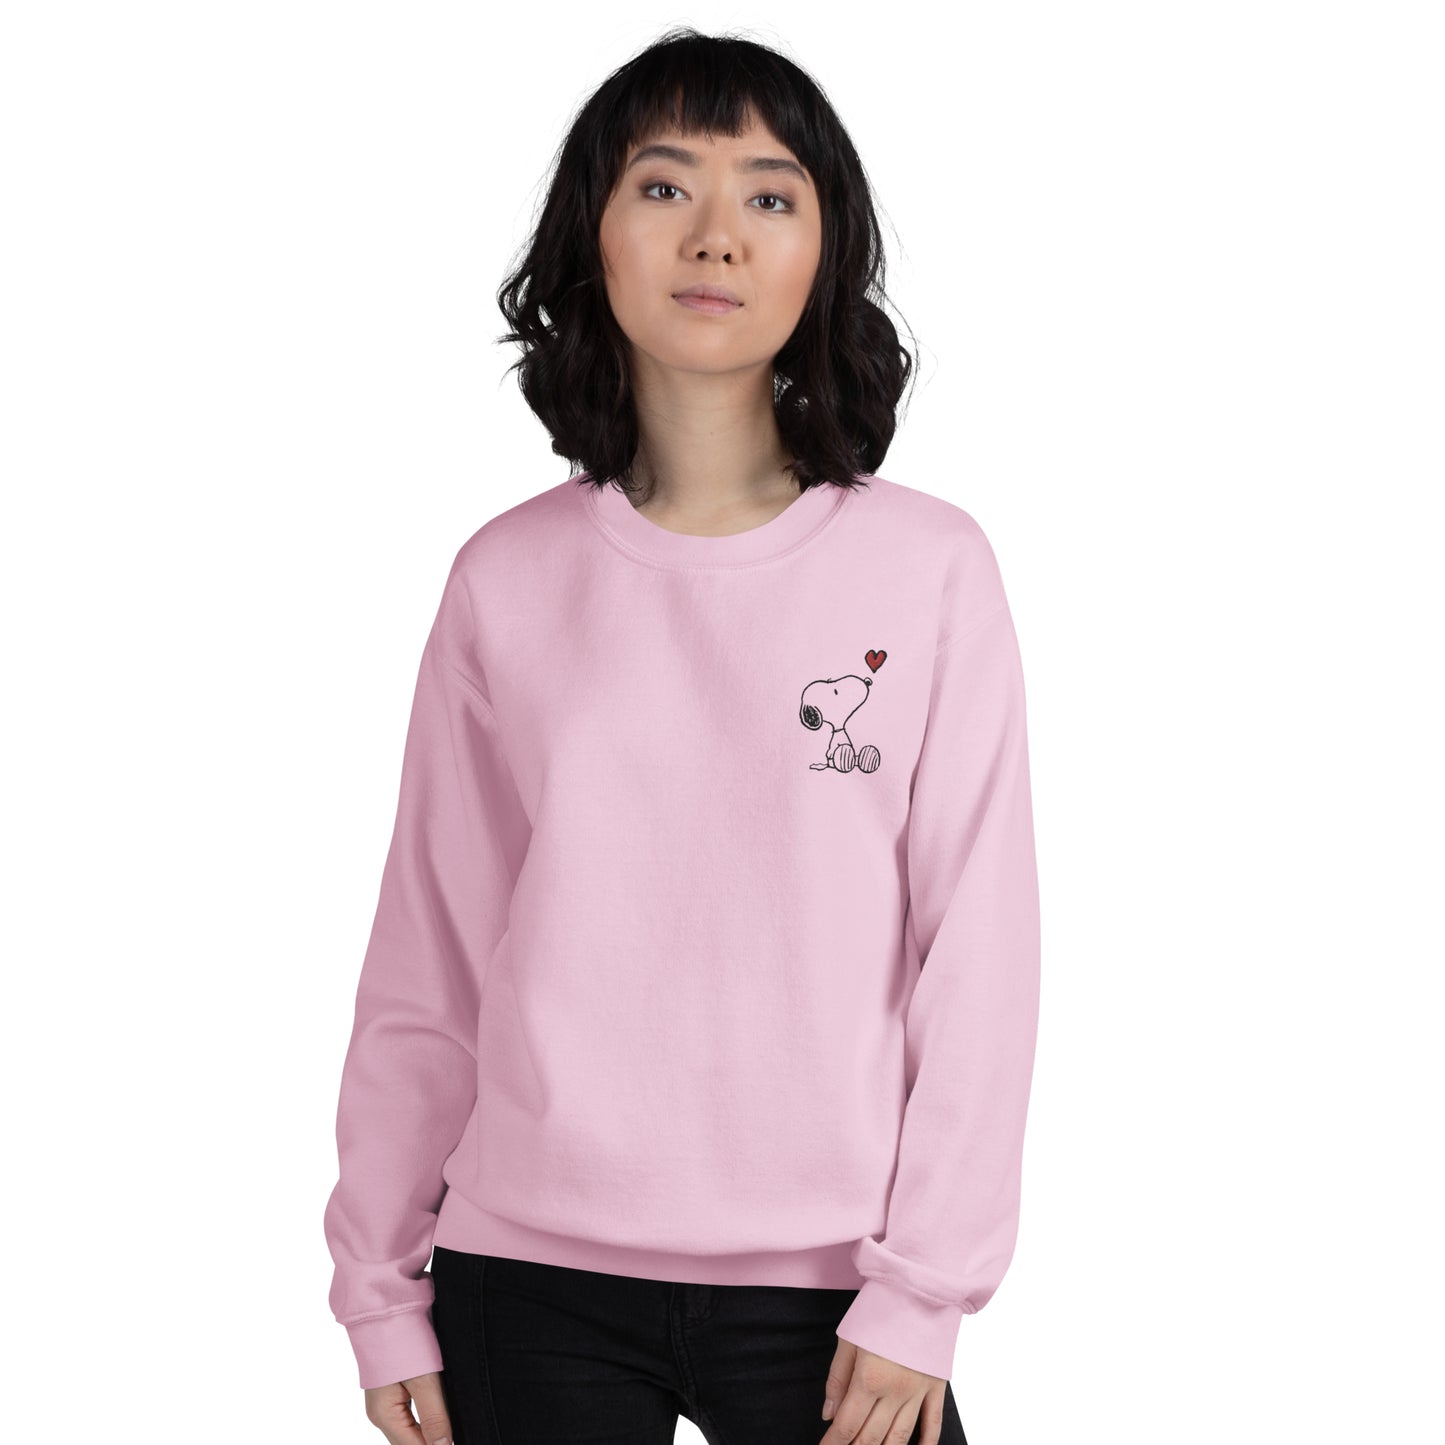 Snoopy Heart Embroidered Adult Crewneck